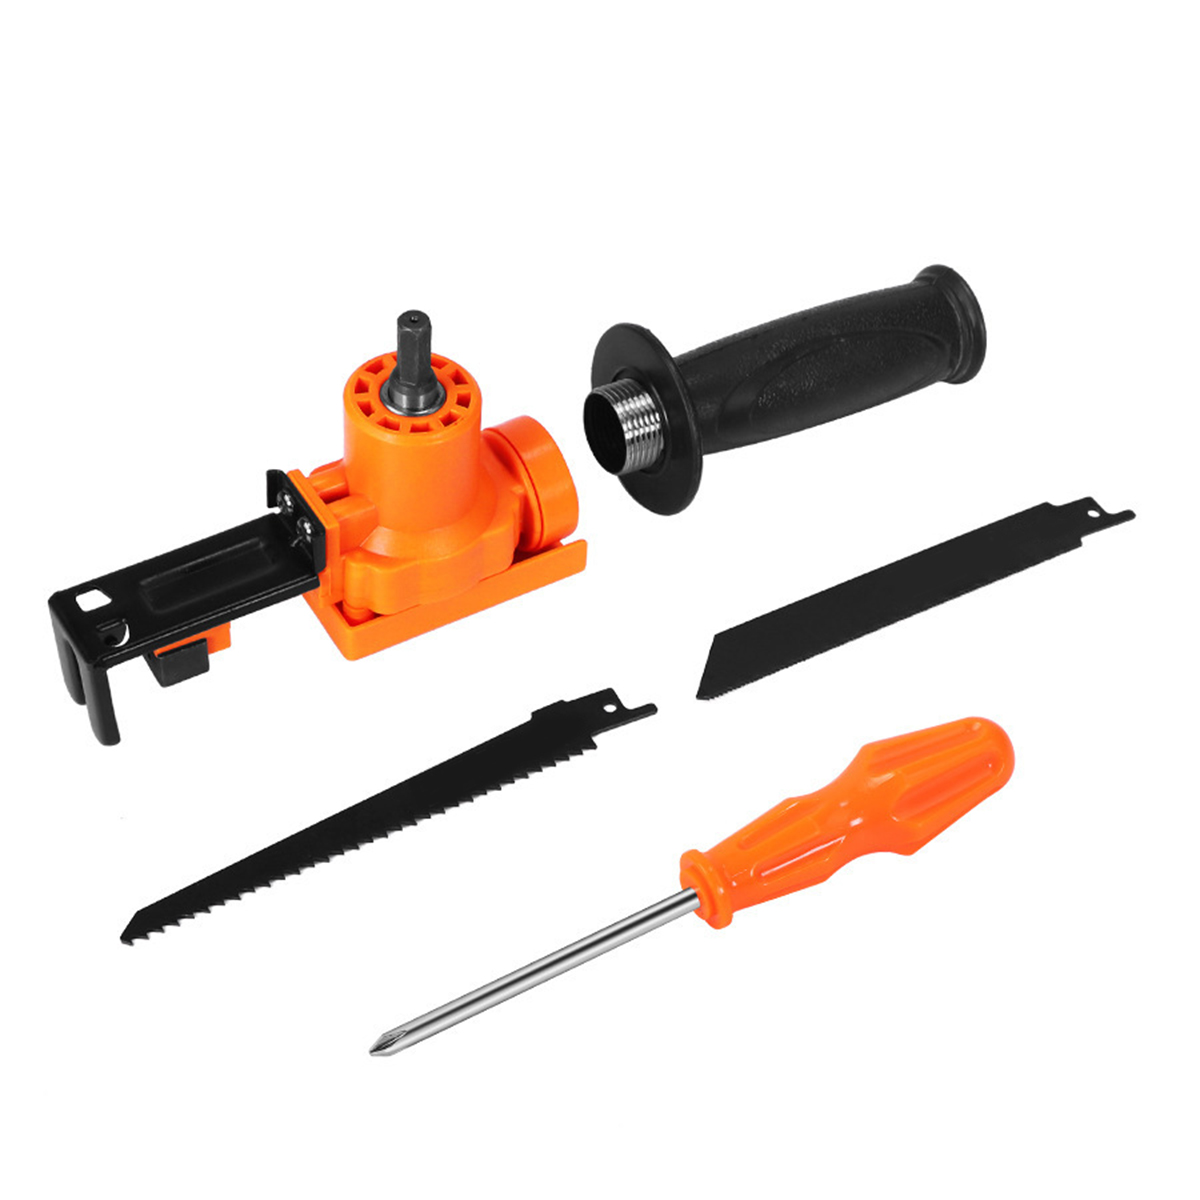 Reciprocating-Saw-Attachment-Adapter-Change-Electric-Drill-Into-Reciprocating-Saw-for-Wood-Metal-Cut-1725363-4